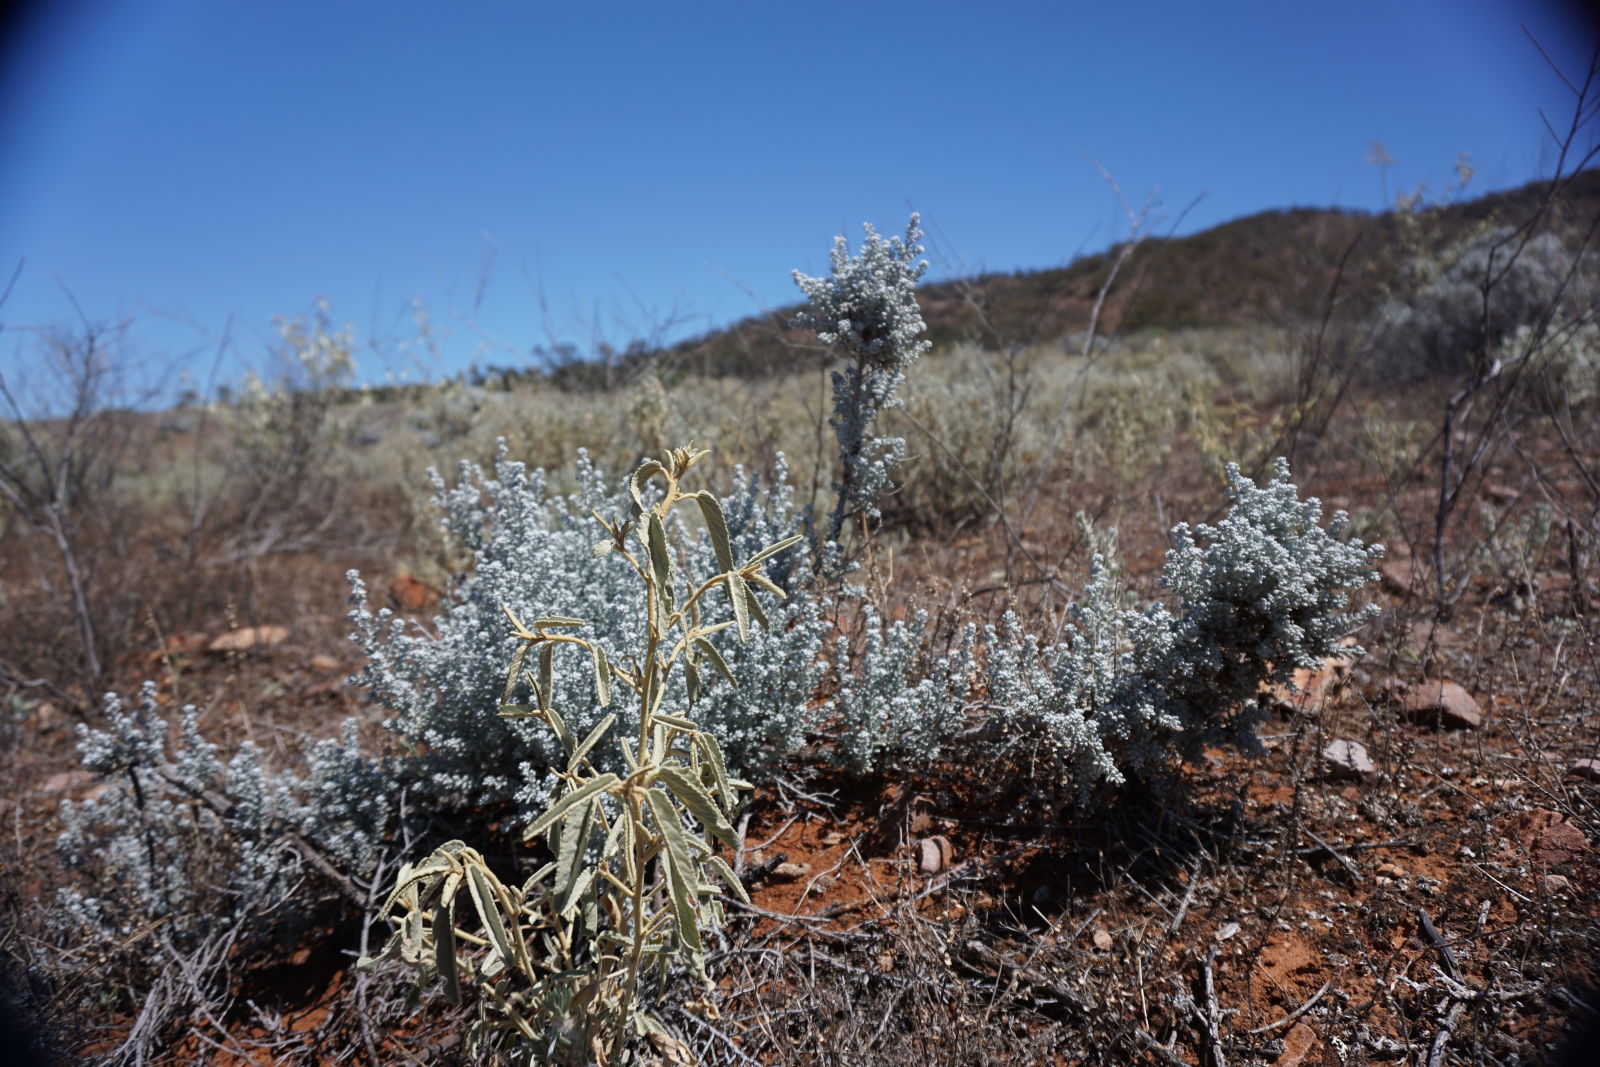 I love this grey/green/white/blue colour you get in the bush. A perfect contrast to the sky and the red earth.